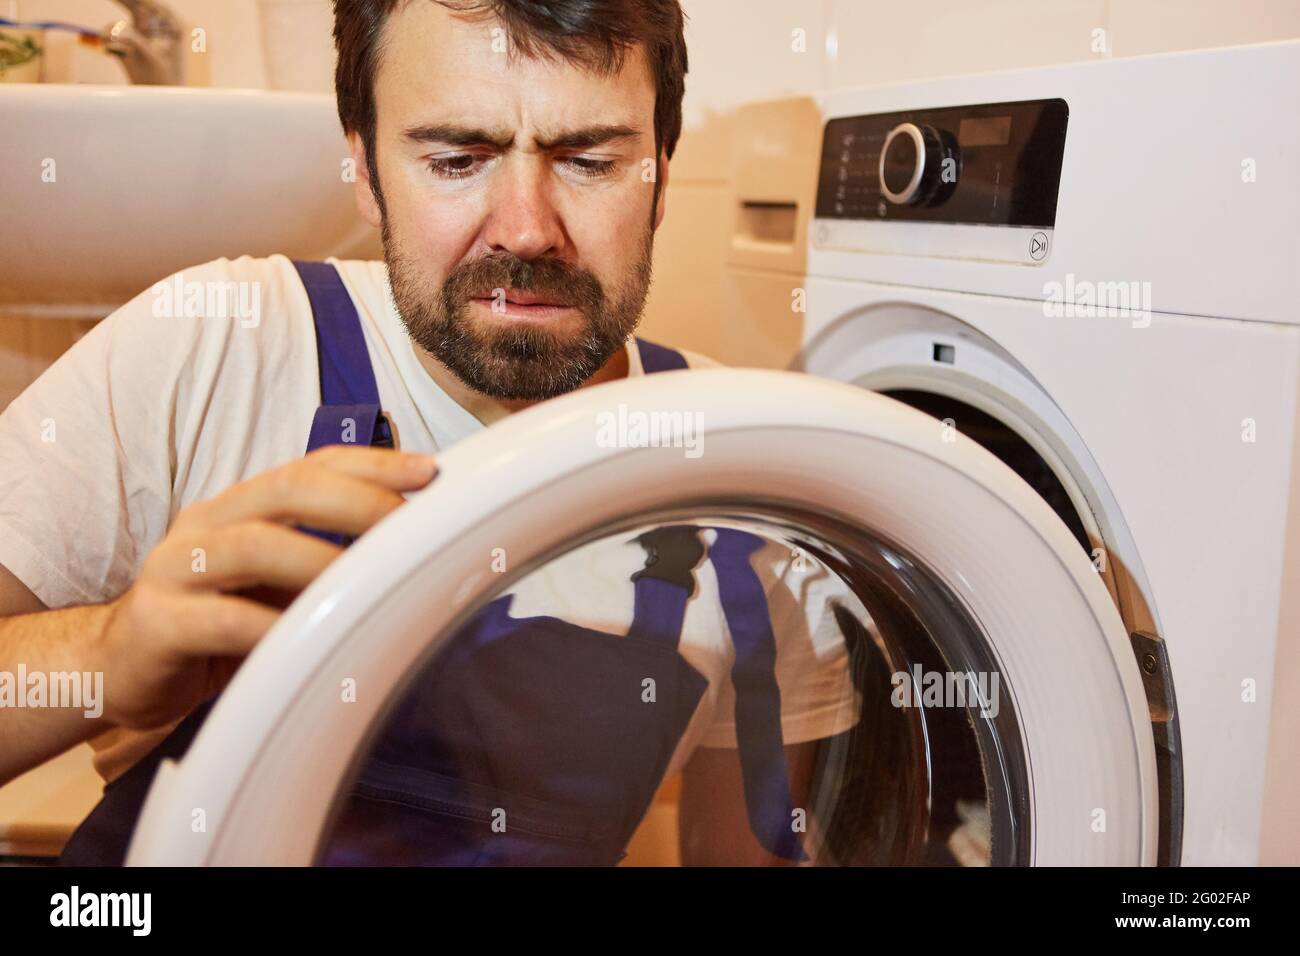 Do-it-yourselfer or plumber repairs defective clothes dryer in the laundry room Stock Photo